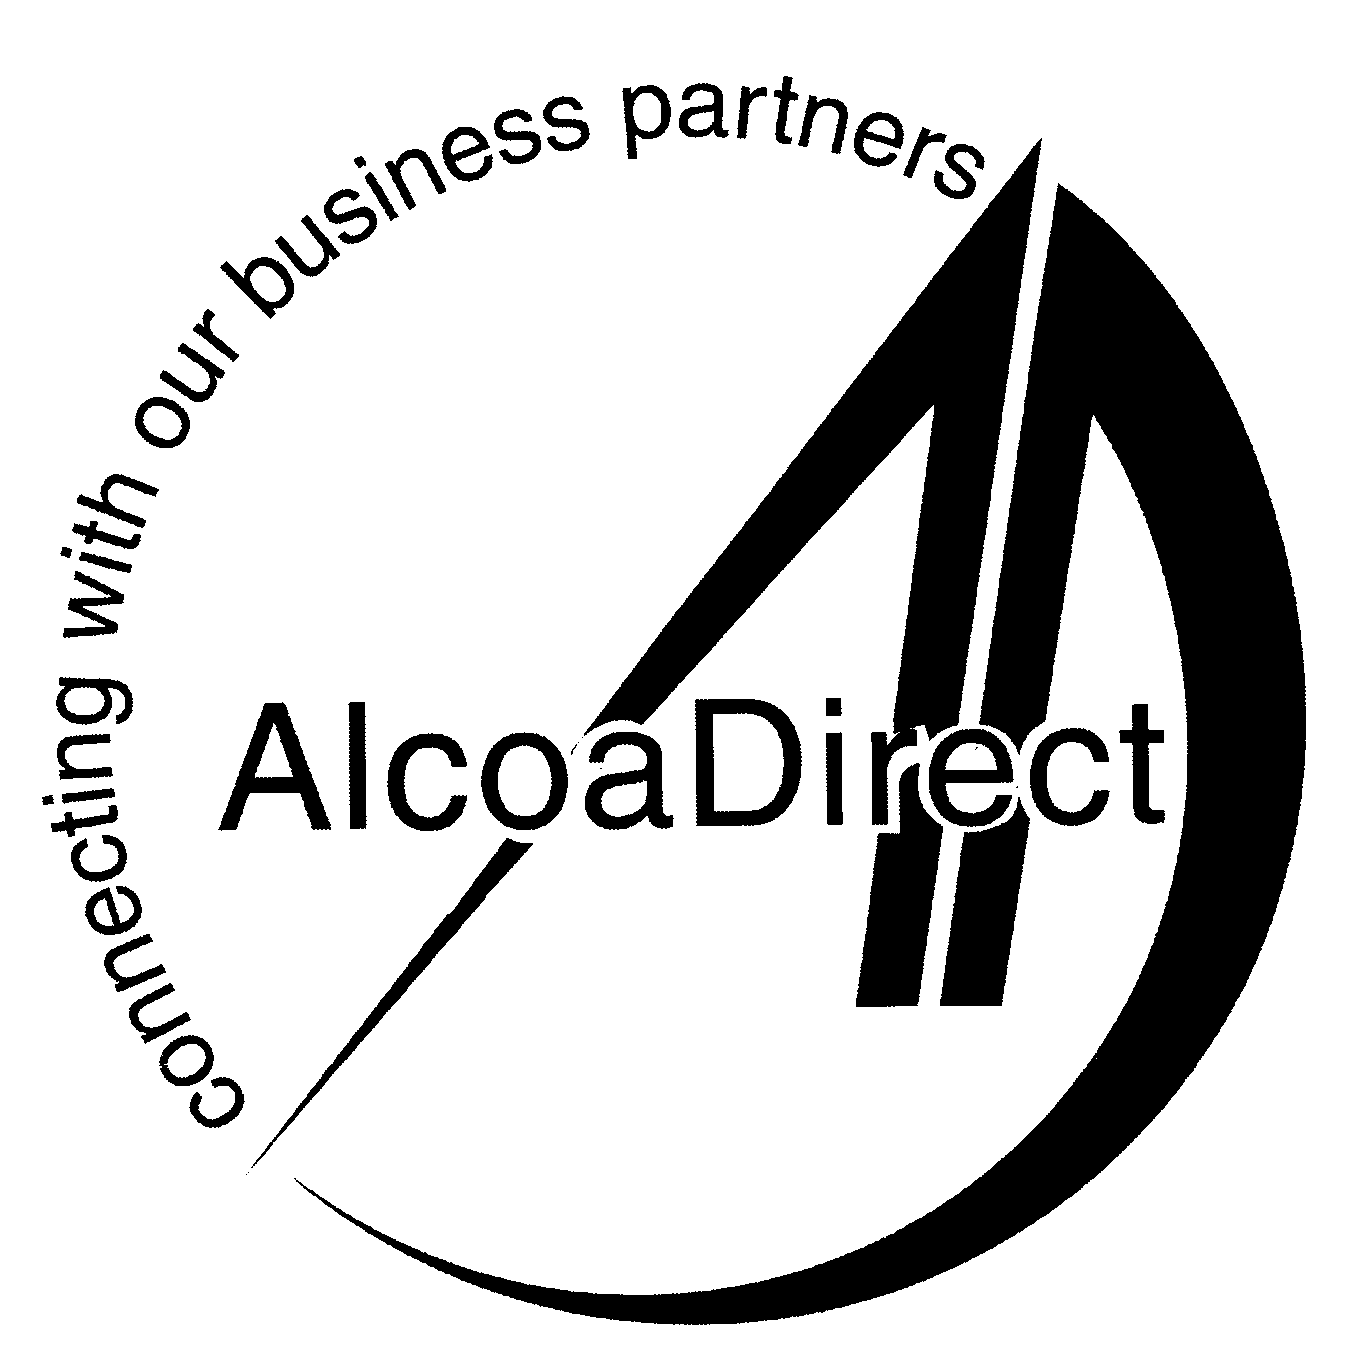  CONNECTING WITH OUR BUSINESS PARTNERS ALCOA DIRECT